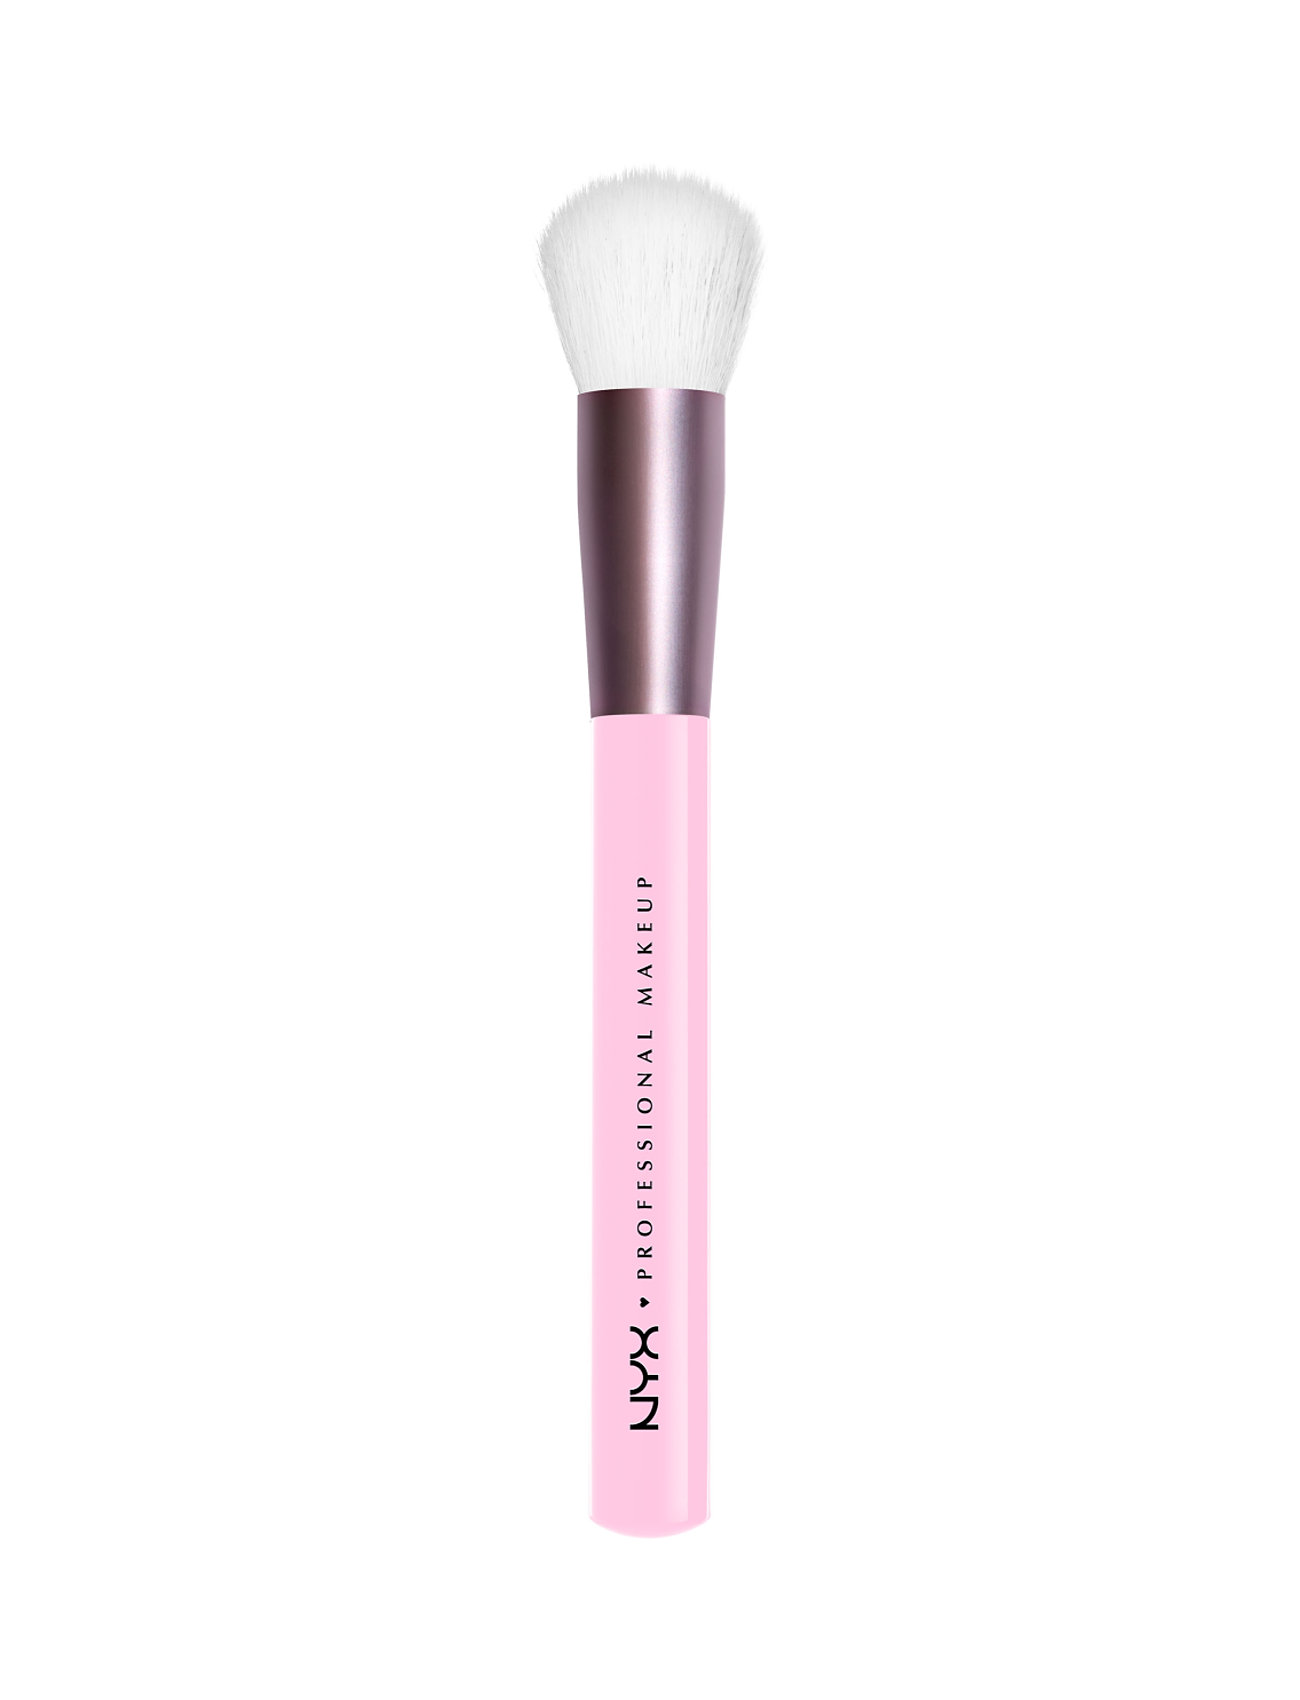 Nyx Professional Make Up Bare With Me Blur Brush 01 Beauty Women Makeup Makeup Brushes Face Brushes Foundation Brushes Multi/patterned NYX Professional Makeup